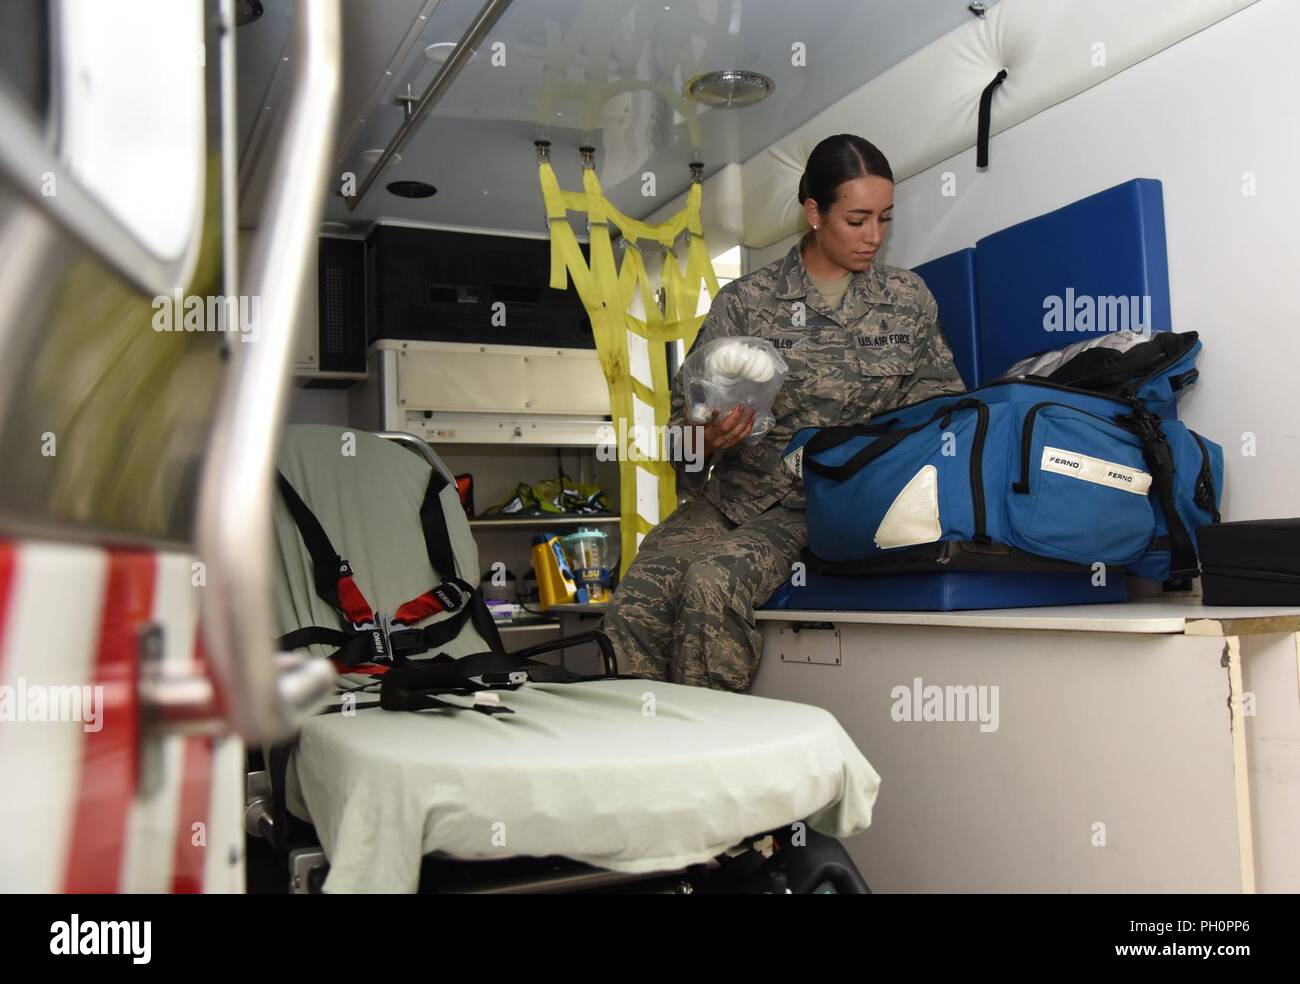 U.S. Air Force Tech. Sgt. Juliet Corcillo, 81st Medical Operations Squadron emergency room NCO in charge, conducts a daily function check inside an ambulance at Keesler Air Force Base, Mississippi, June 14, 2018. Corcillo will begin her first day of medical school July 6 with a four-year scholarship from the Air Force’s Health Professions Scholarship Program. Stock Photo